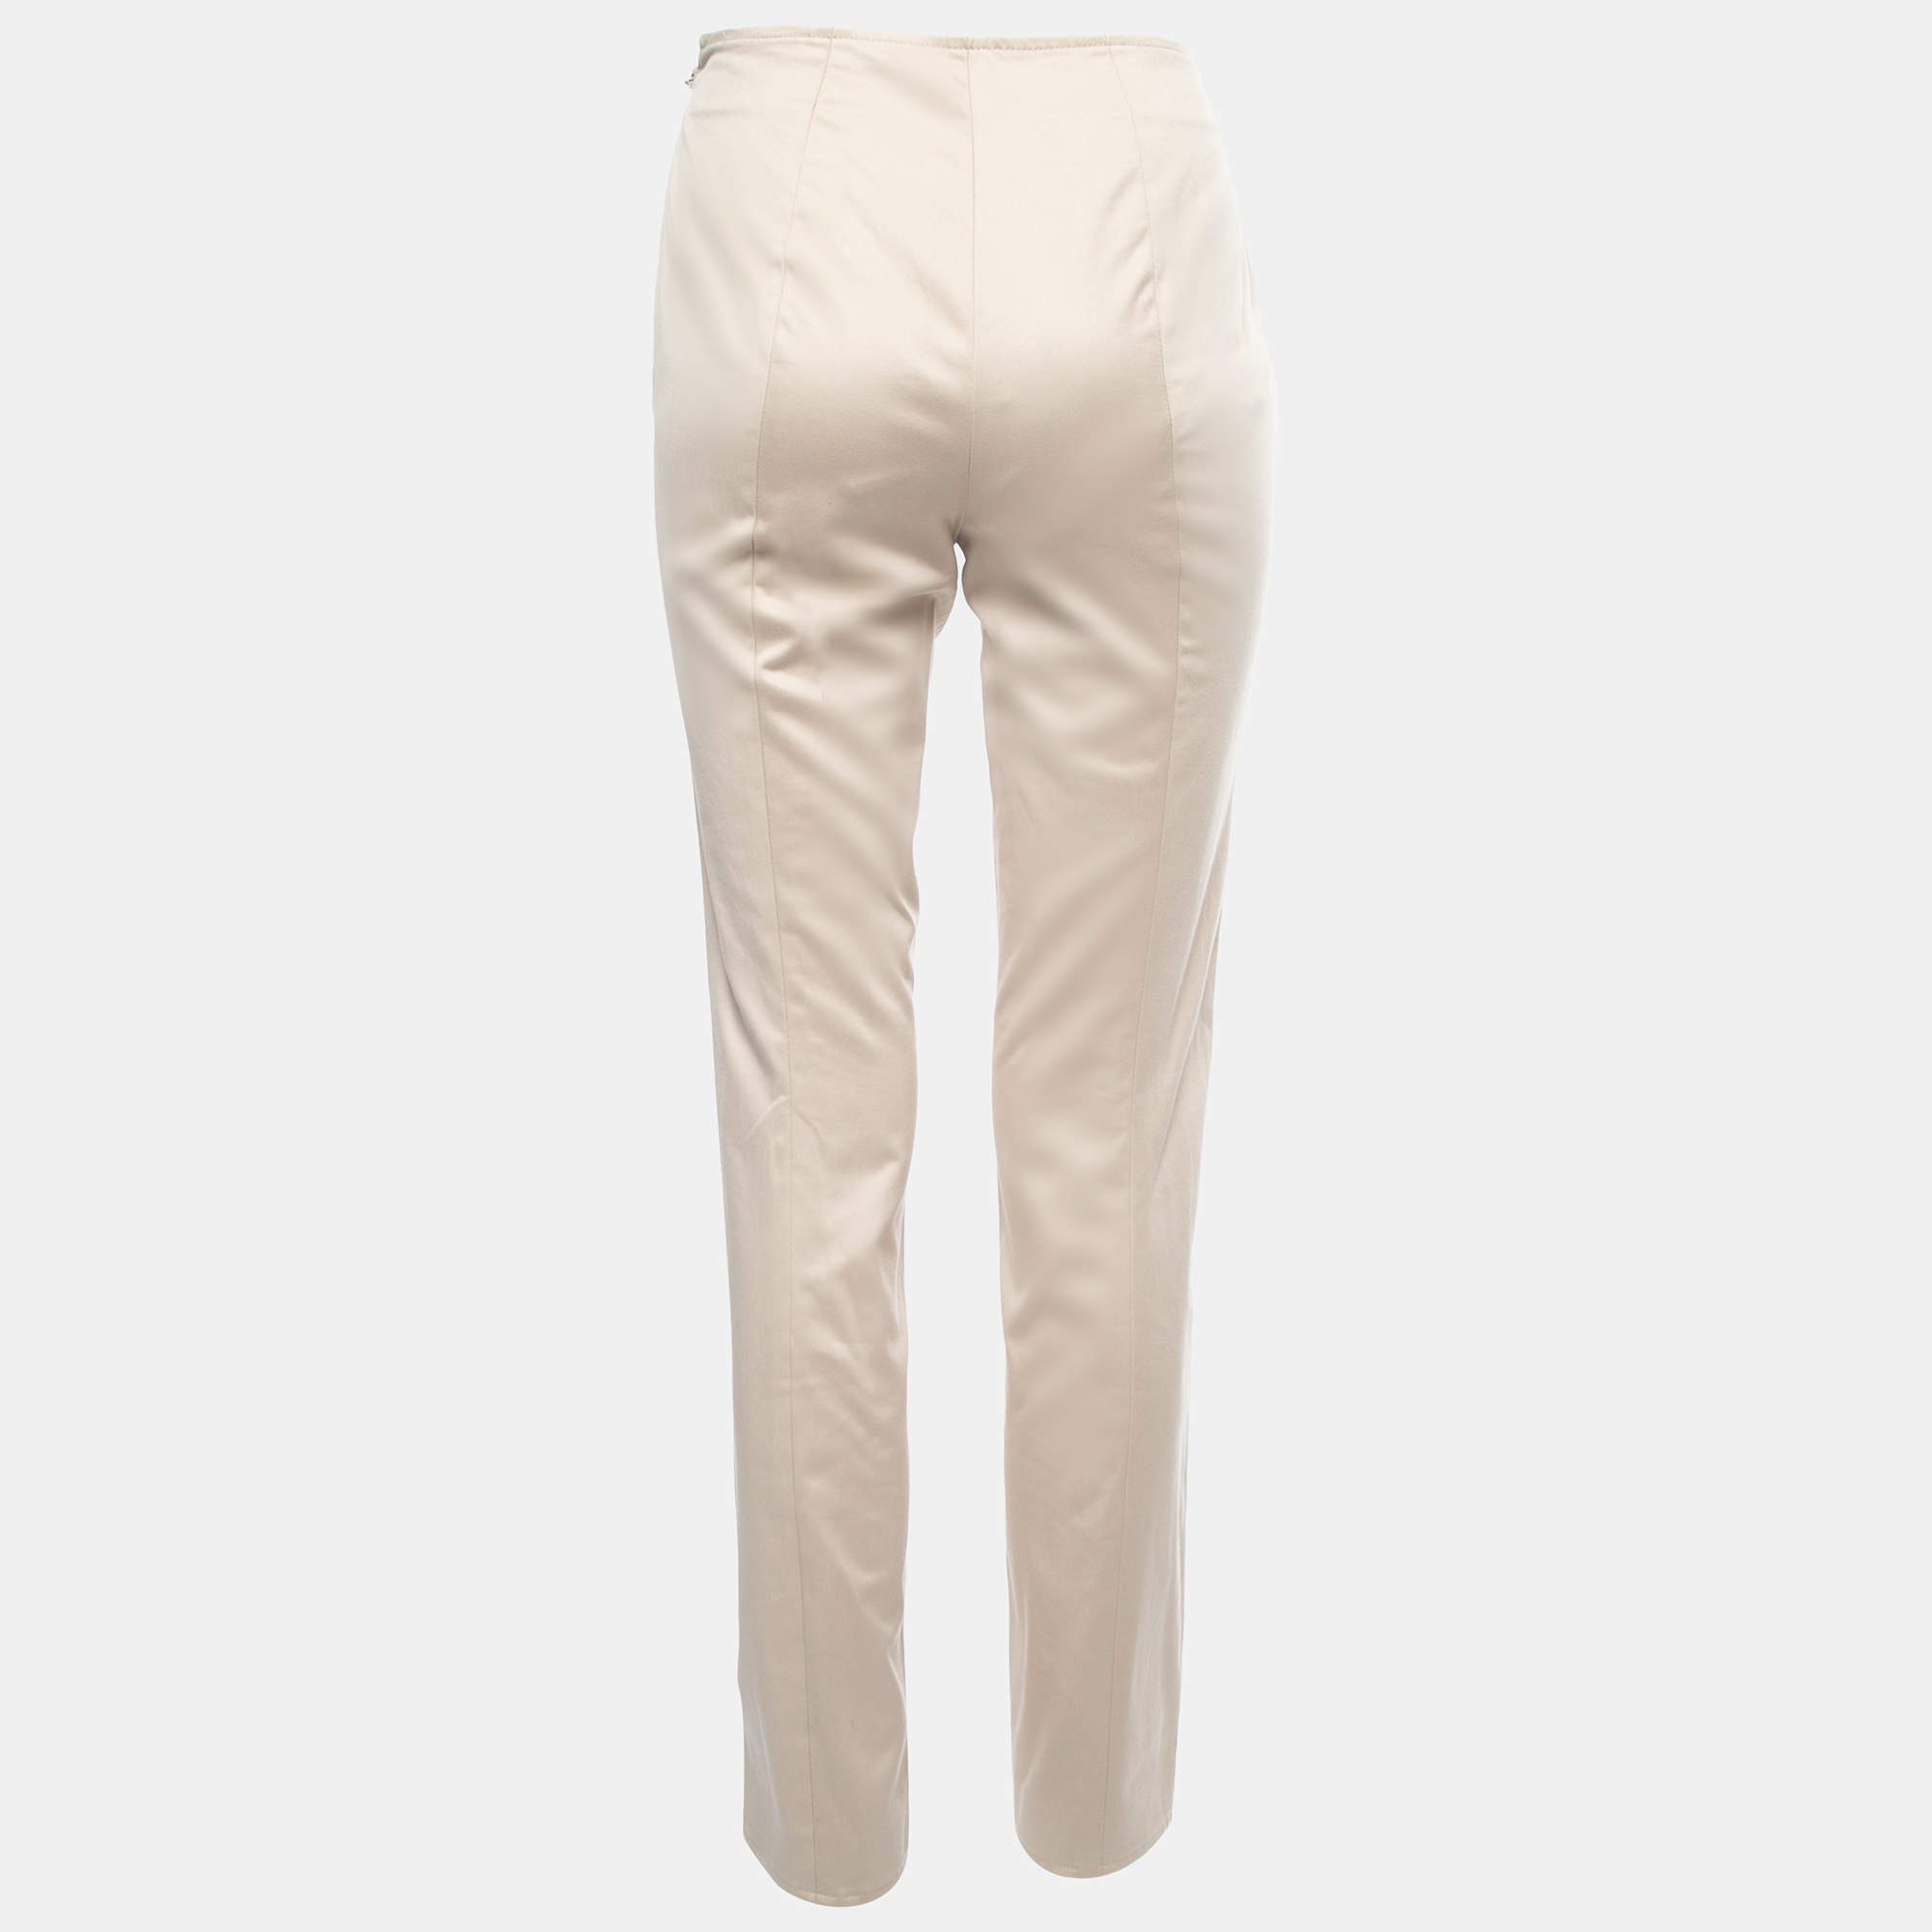 Armani Exchange - White Linen Trousers for Women with Waistband –  TripAttires.com